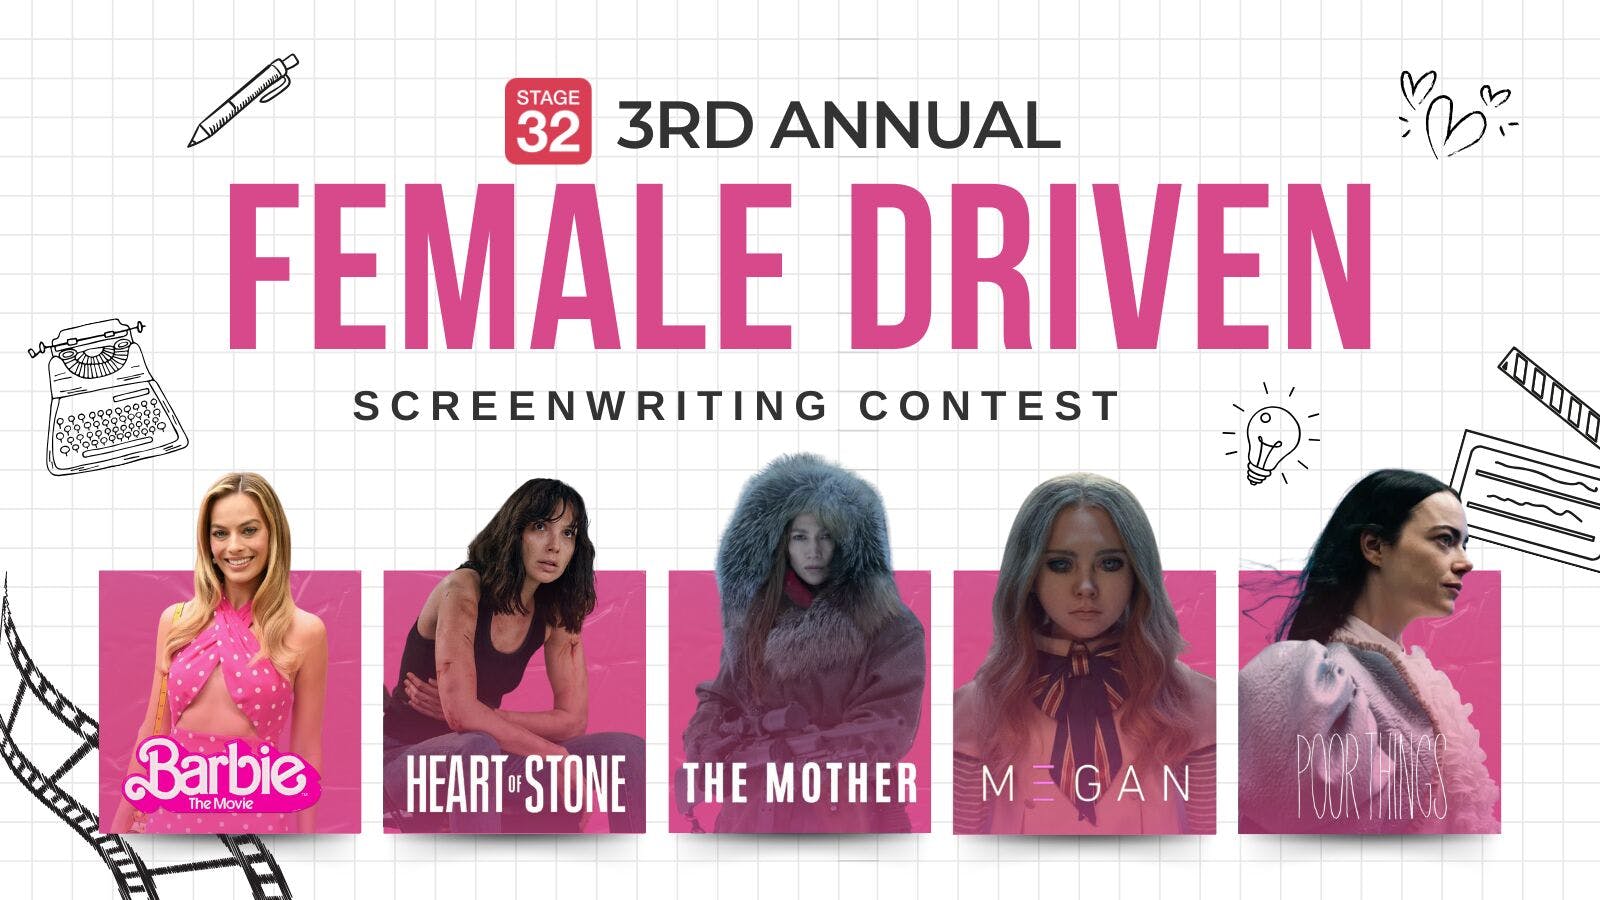 Announcing the 3rd Annual Female Driven Screenwriting Contest